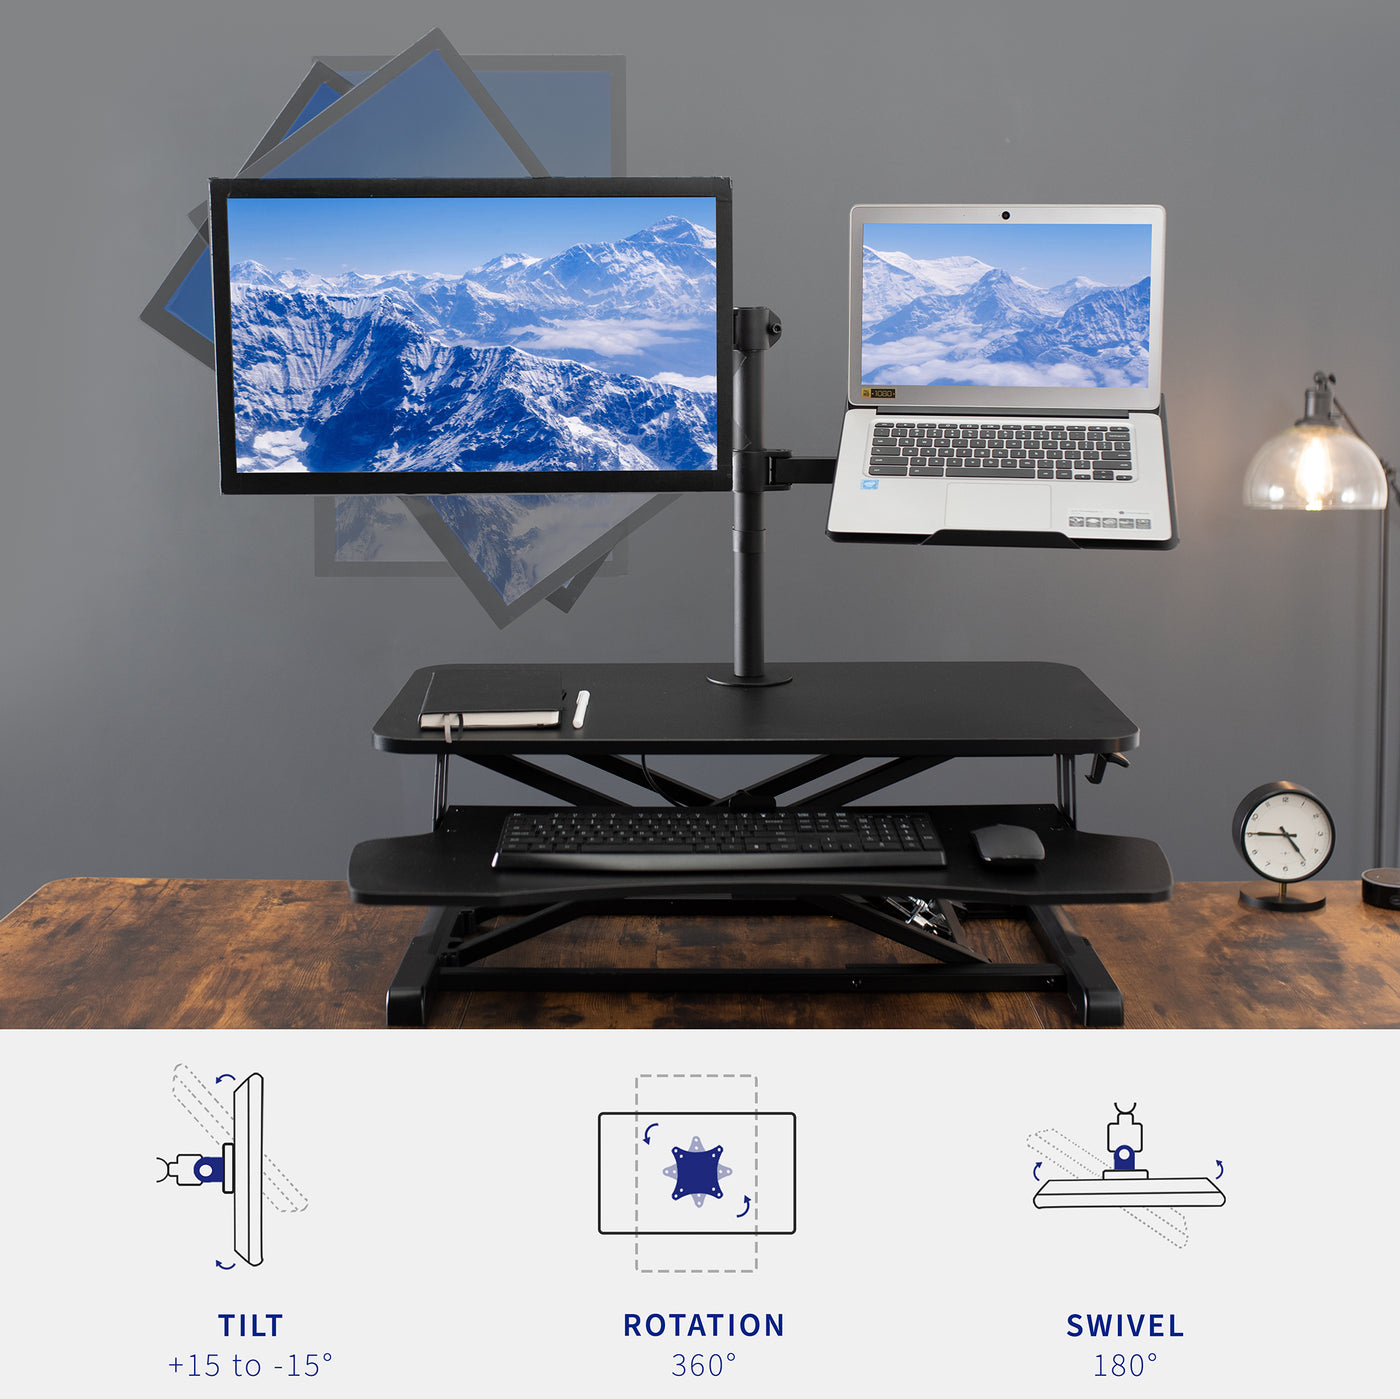 Standing Desk Converter – VIVO - desk solutions, screen mounting, and more